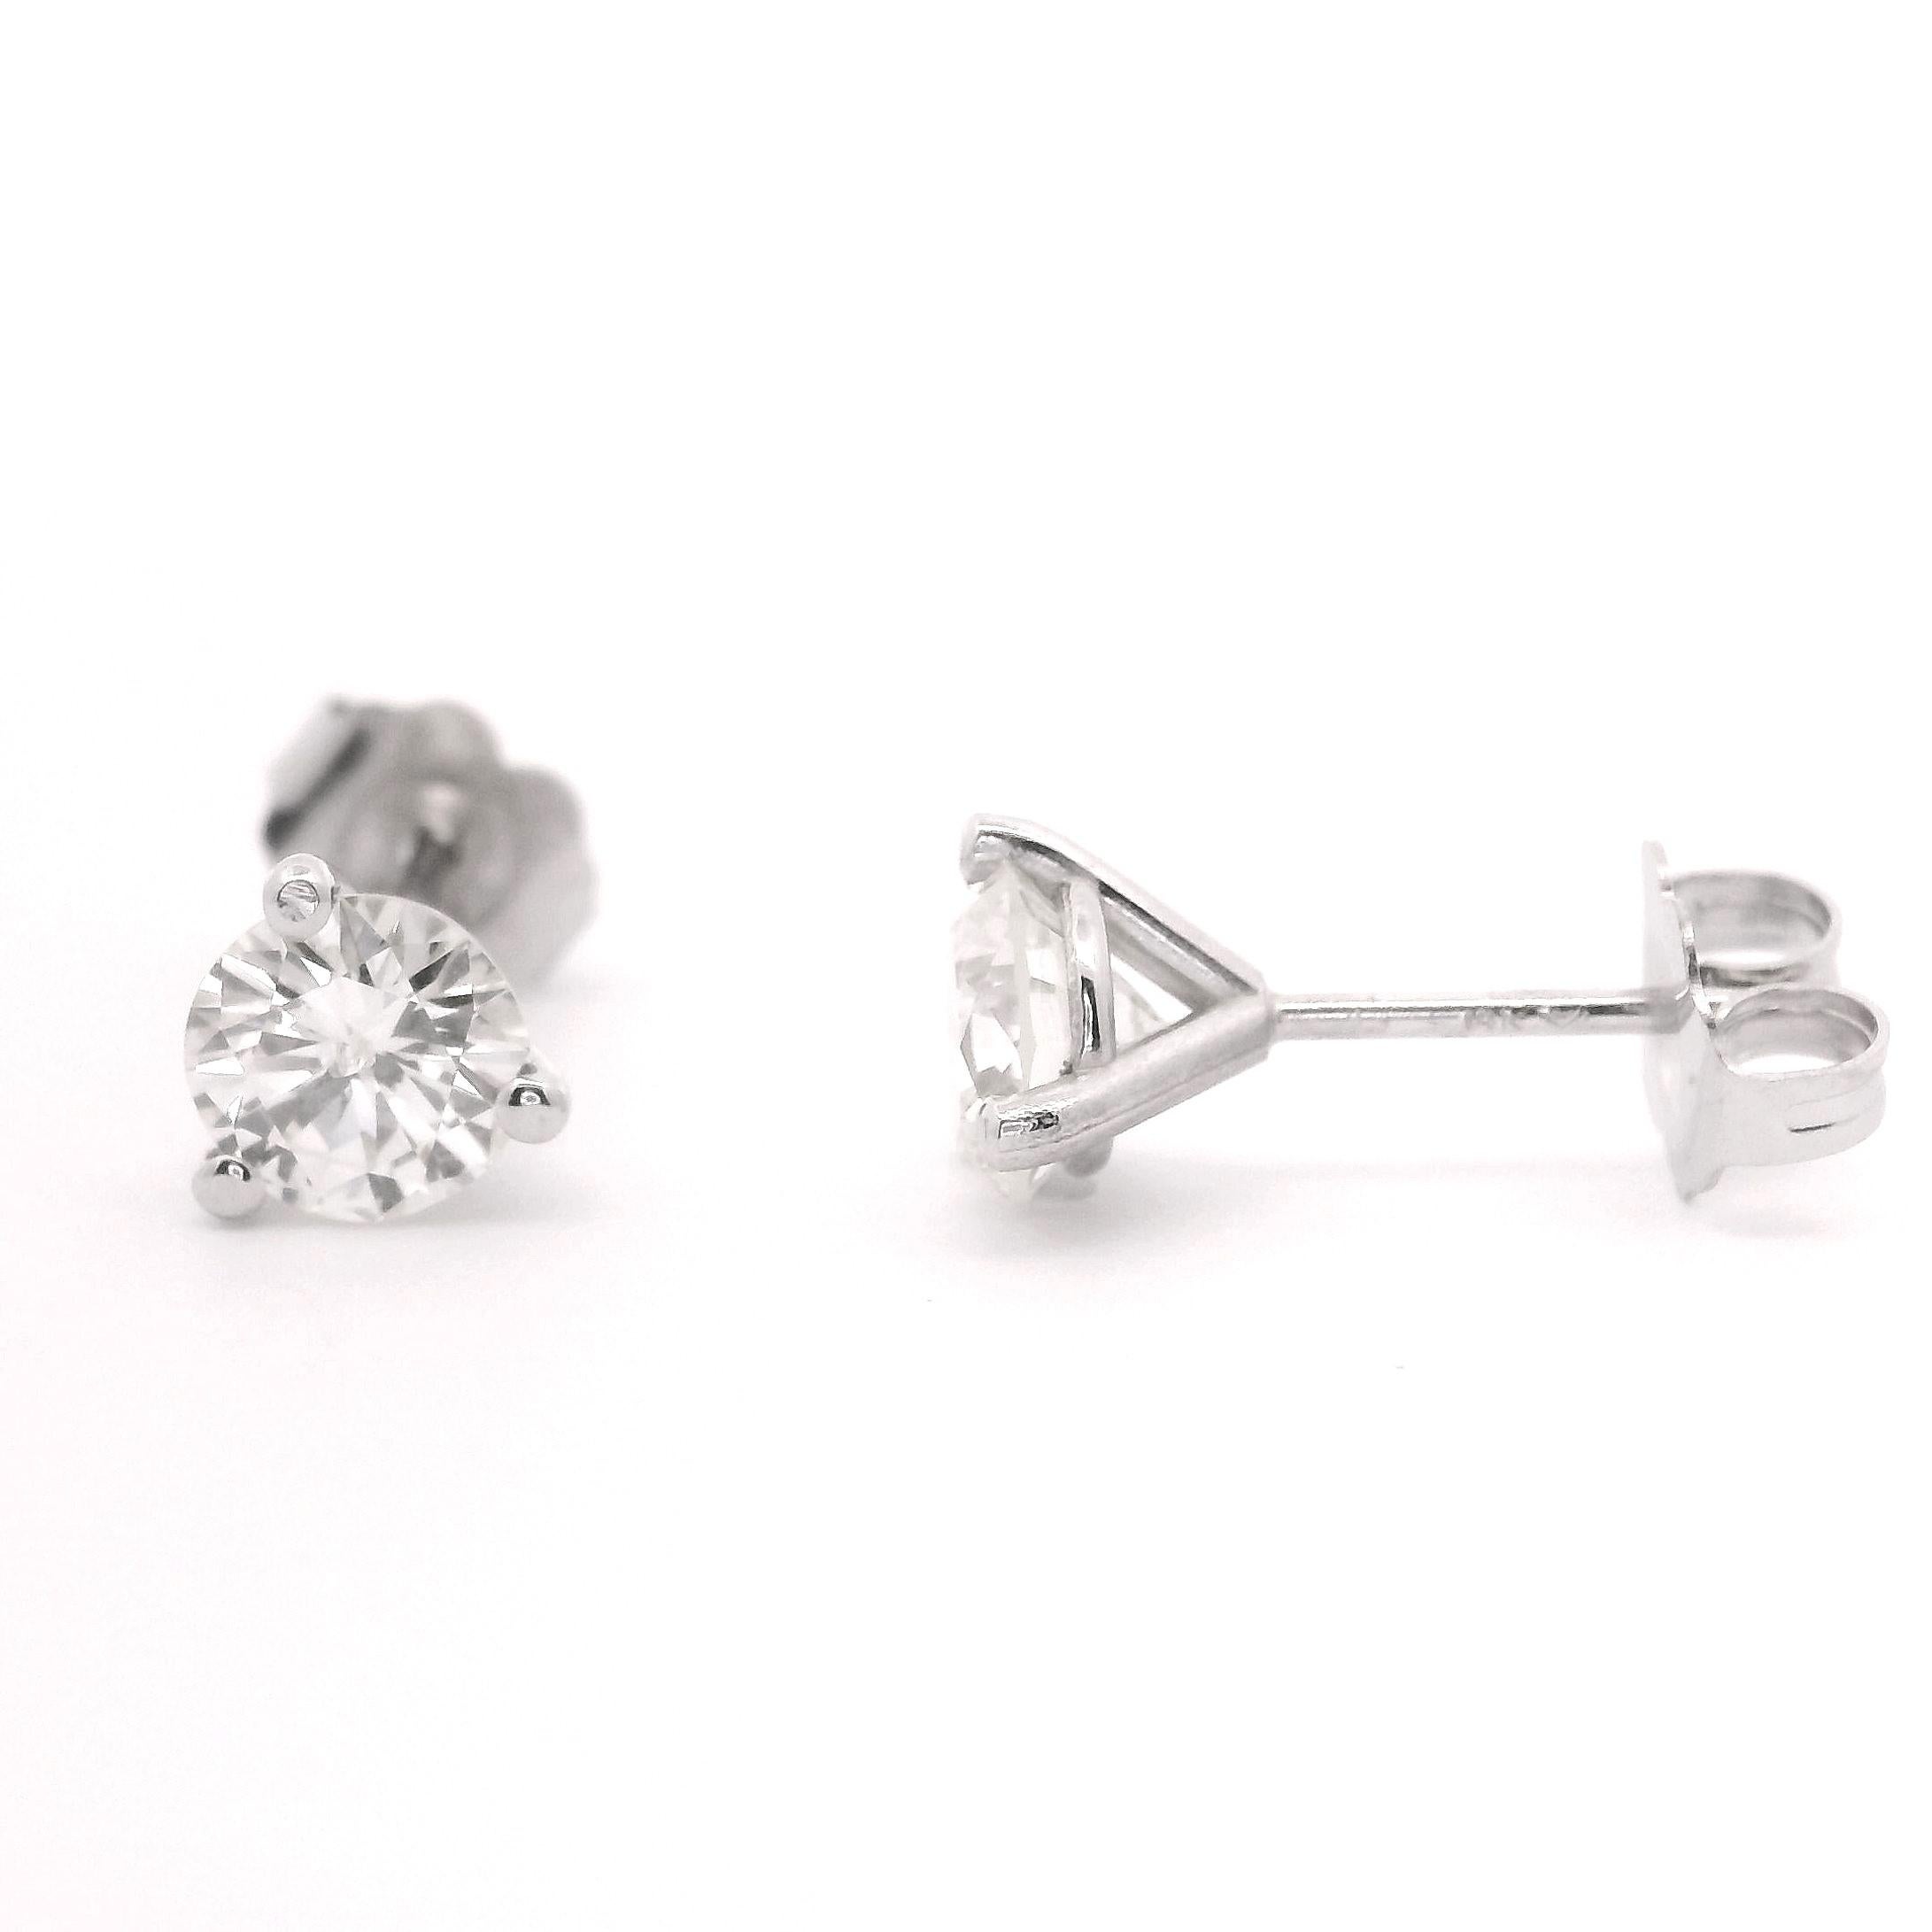 Brand New 1.2cttw Natural Diamond Stud Earrings in 14k White Gold In New Condition For Sale In Guilford, CT